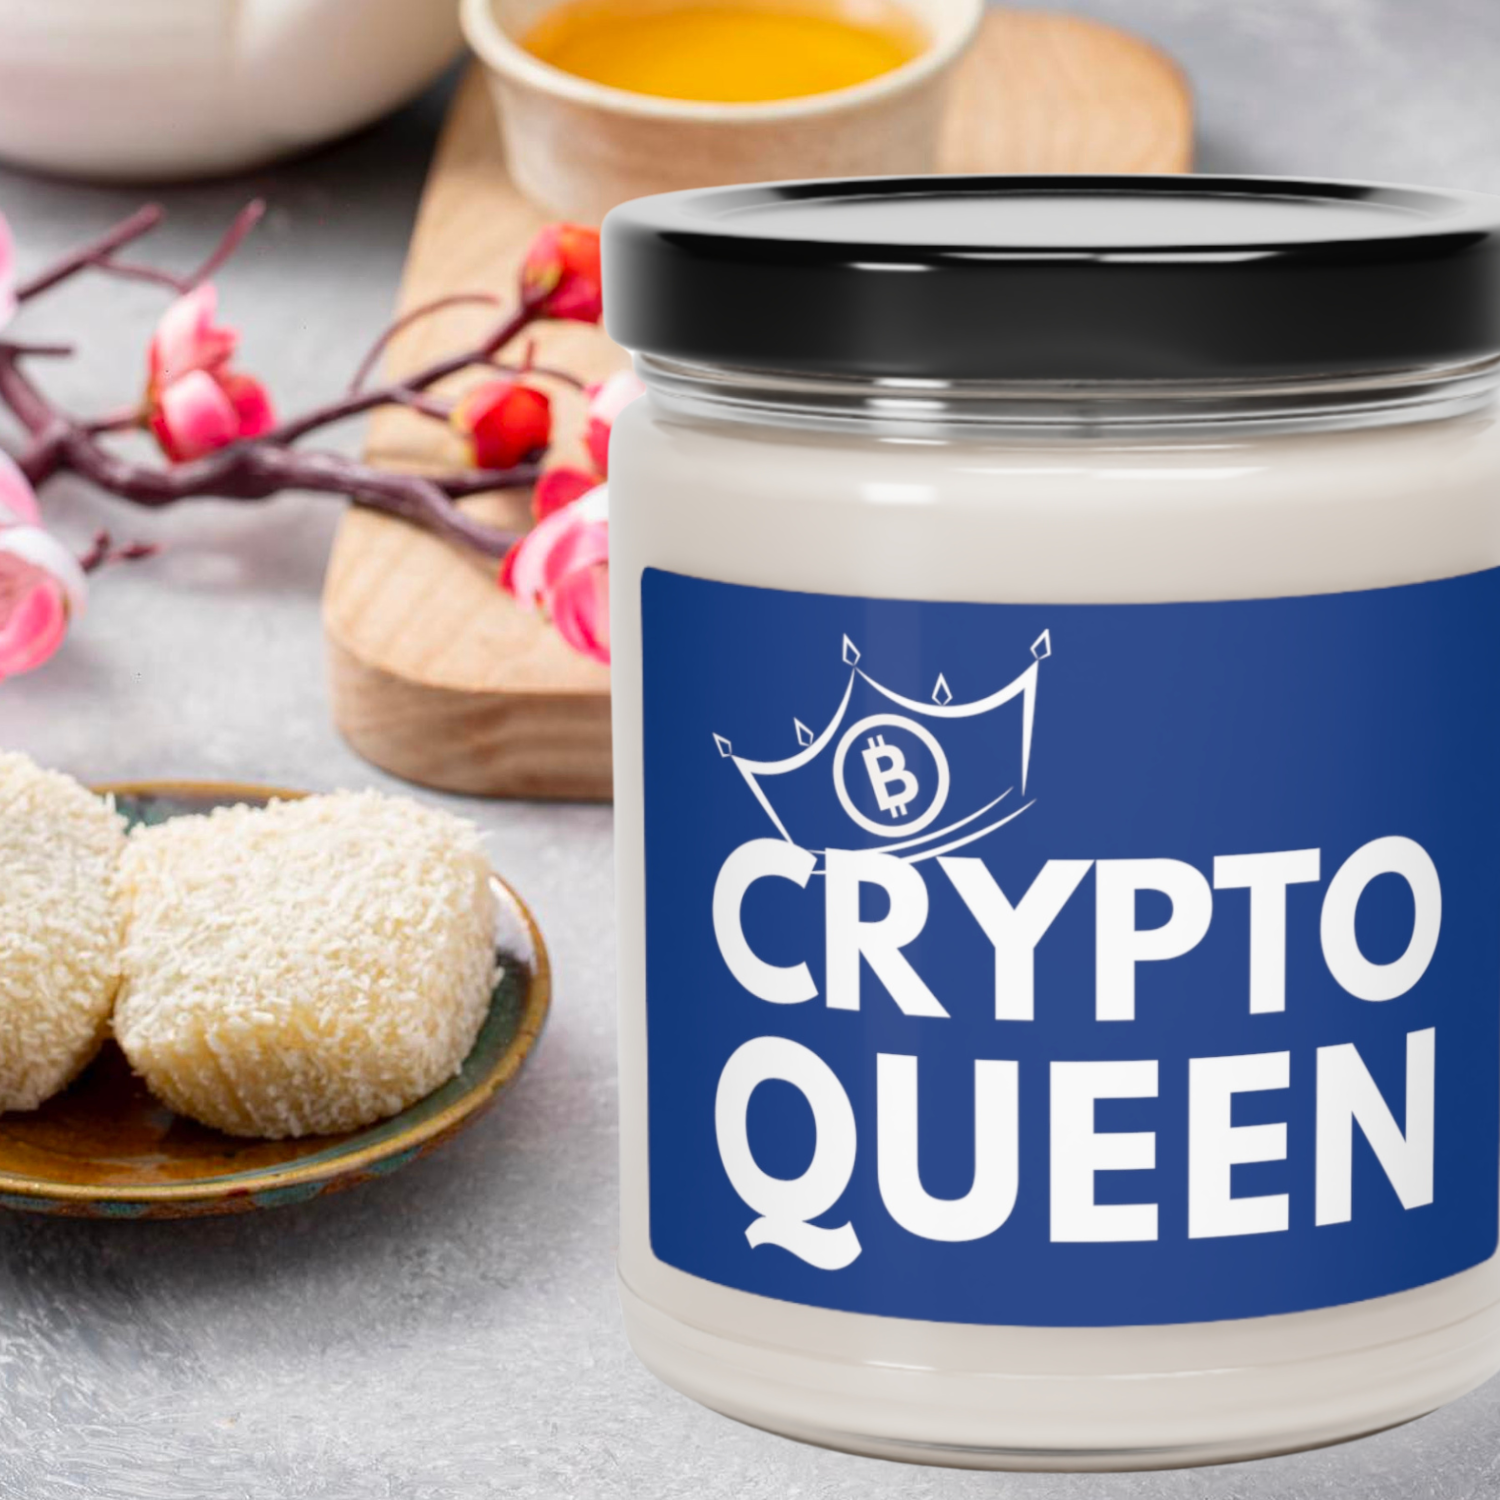 Crypto Queen scented soy candle, available in 9 scents and a fragrance-free option.